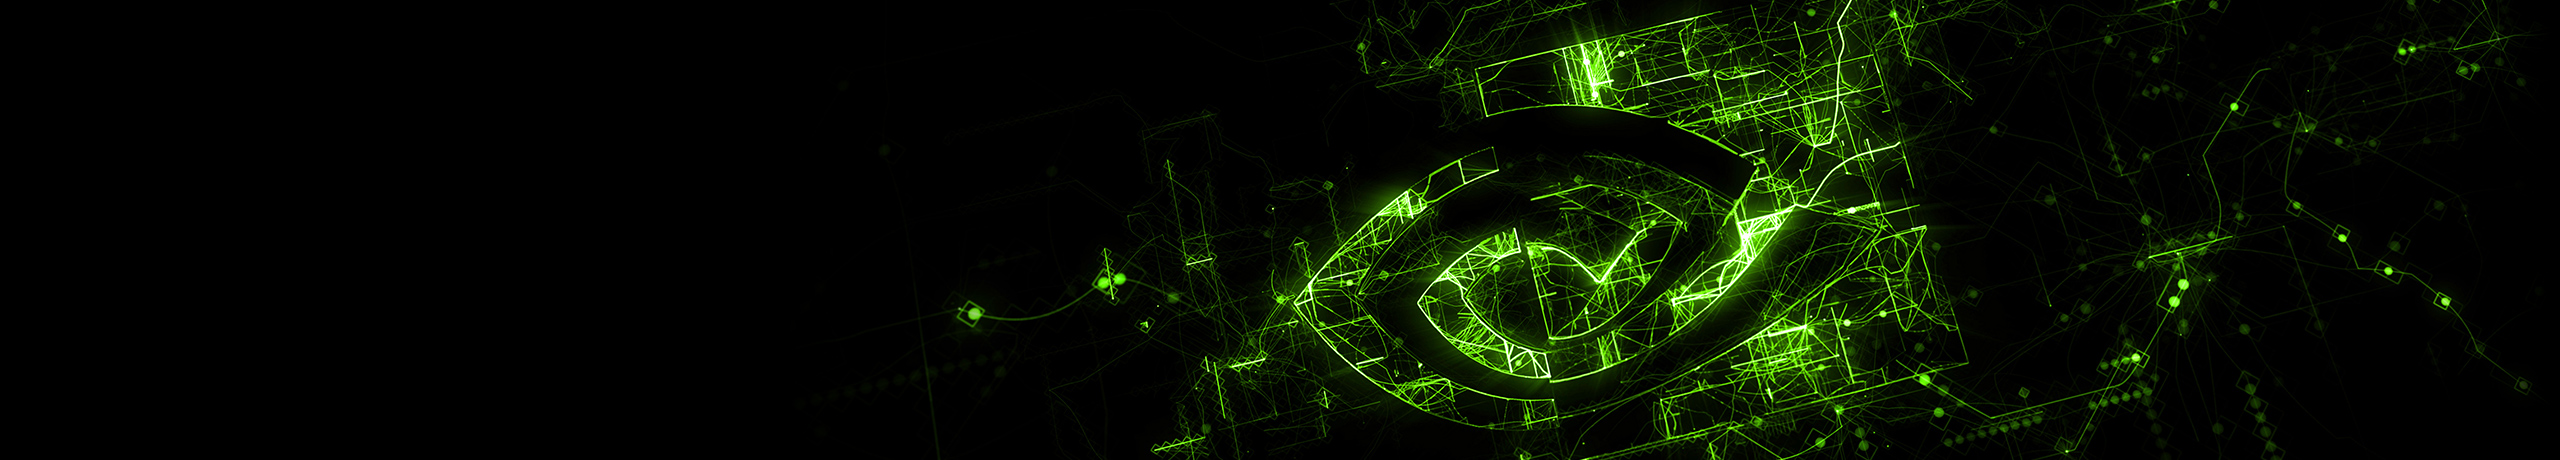 nvidia-corporation-about-us-banner-2560-ud